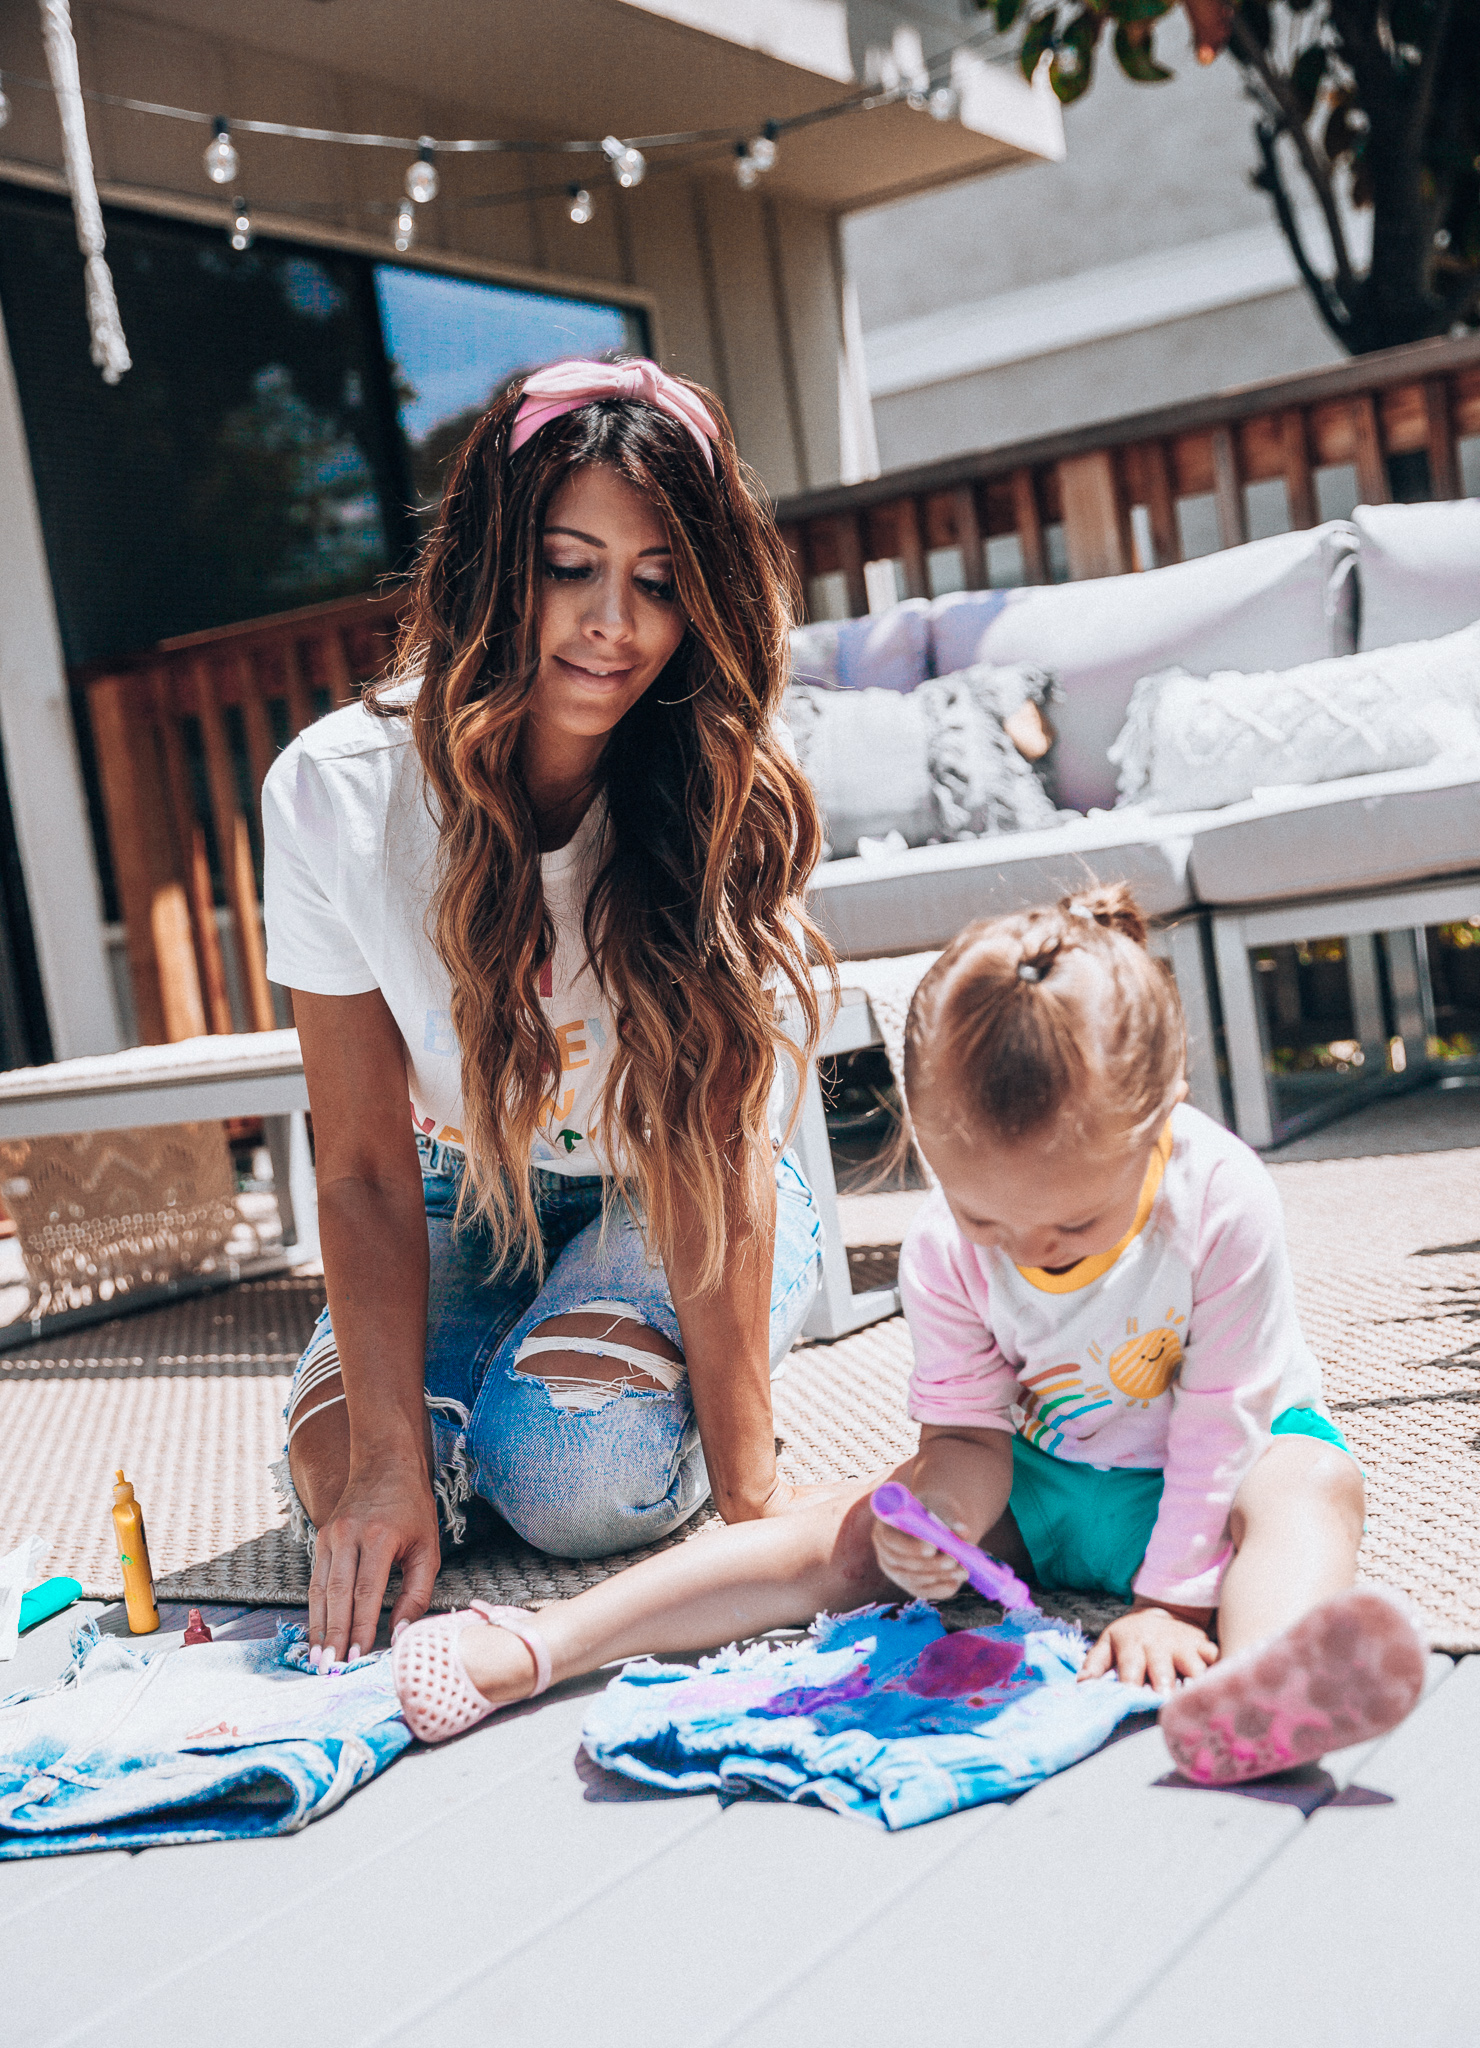 The Girl in the Yellow Dress | Latisha Springer | Fun Summer Activities for Kids by top US mom blog, The Girl in the Yellow Dress: image of mom with young girl sitting on back porch decorating cutoff denim shorts with puff paint.